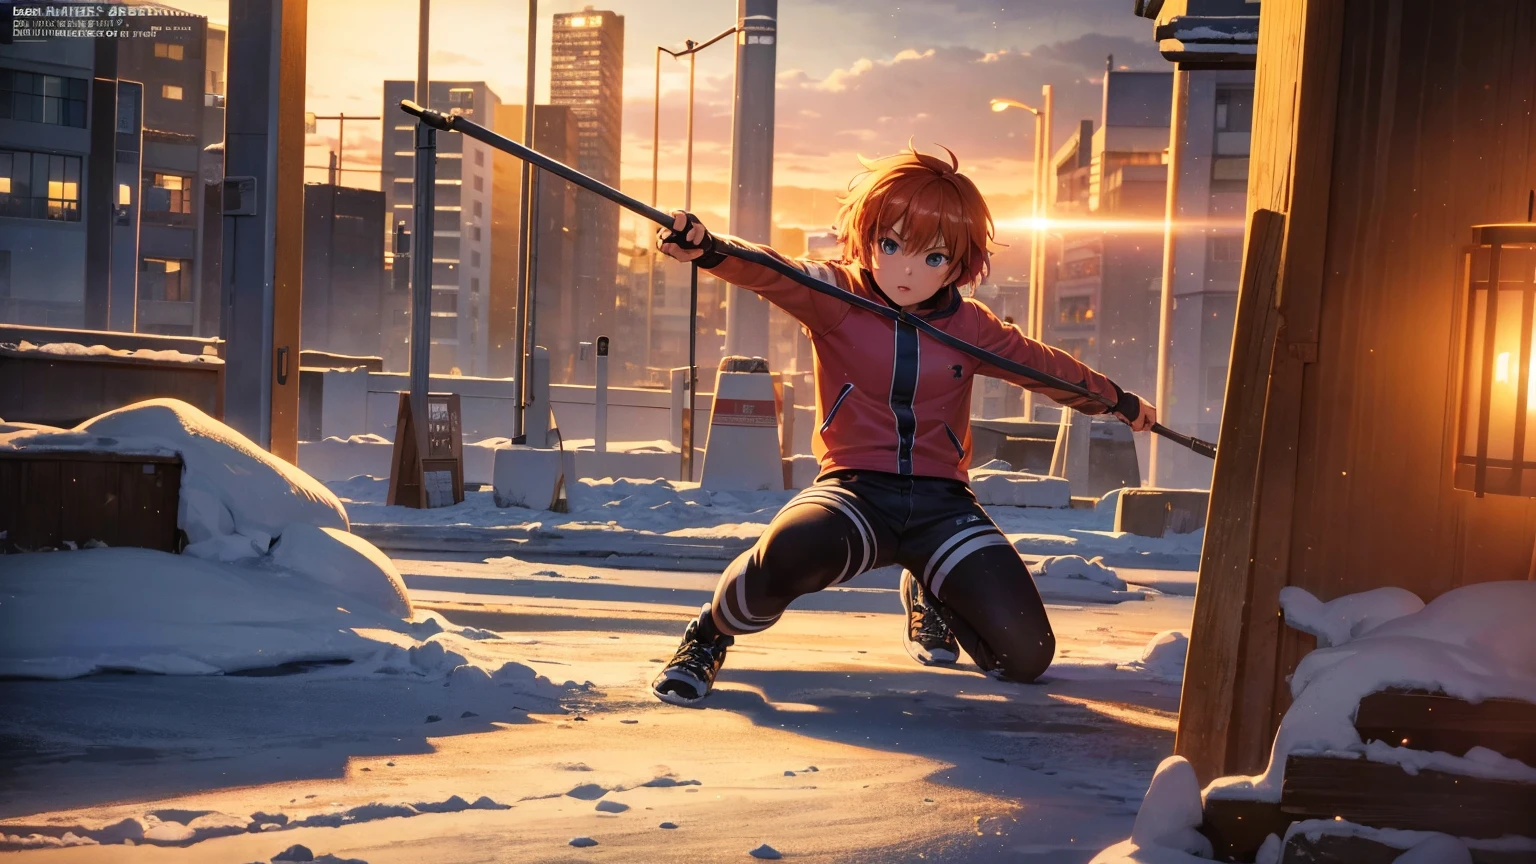 Scott Pilgrim takes off, vibrant orange hair, shirt, jacket, bushy eyebrows, Canada, a solitary figure standing in the snow, (realistic,photorealistic:1.37), detailed winter scenery, frost-covered trees, city lights reflecting off the snow, icy breath, (best quality,4k,8k,highres,masterpiece:1.2), medium: oil painting, comic book style, intense colors, dynamic poses, action lines, (HDR,UHD), sunset hues, warm golden light,has